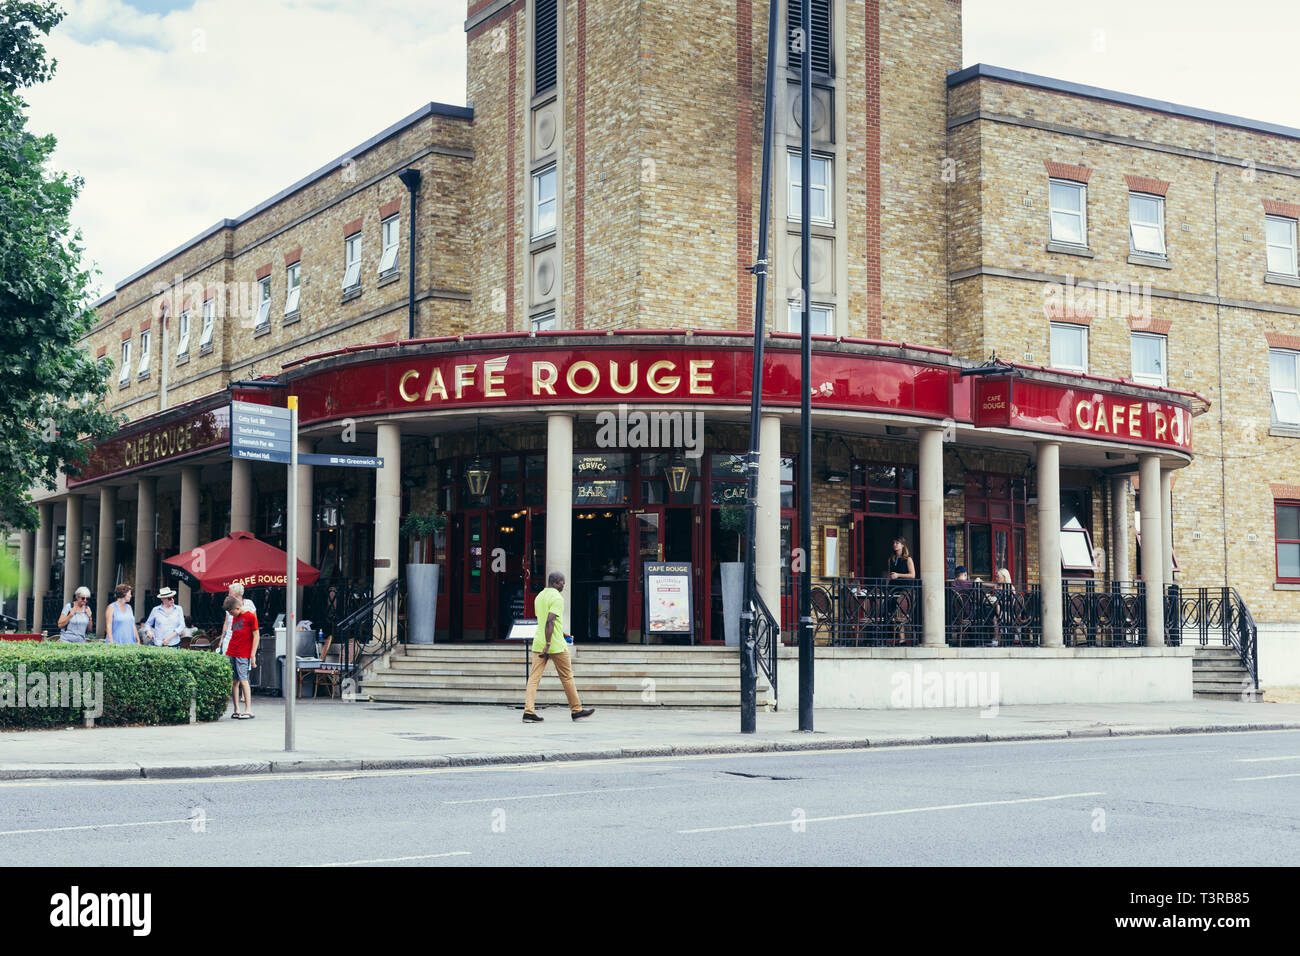 London, UK - July 23, 2018: Cafe Rouge Greenwich is a local bistro with lovely outdoor dining terrace and a porch Stock Photo